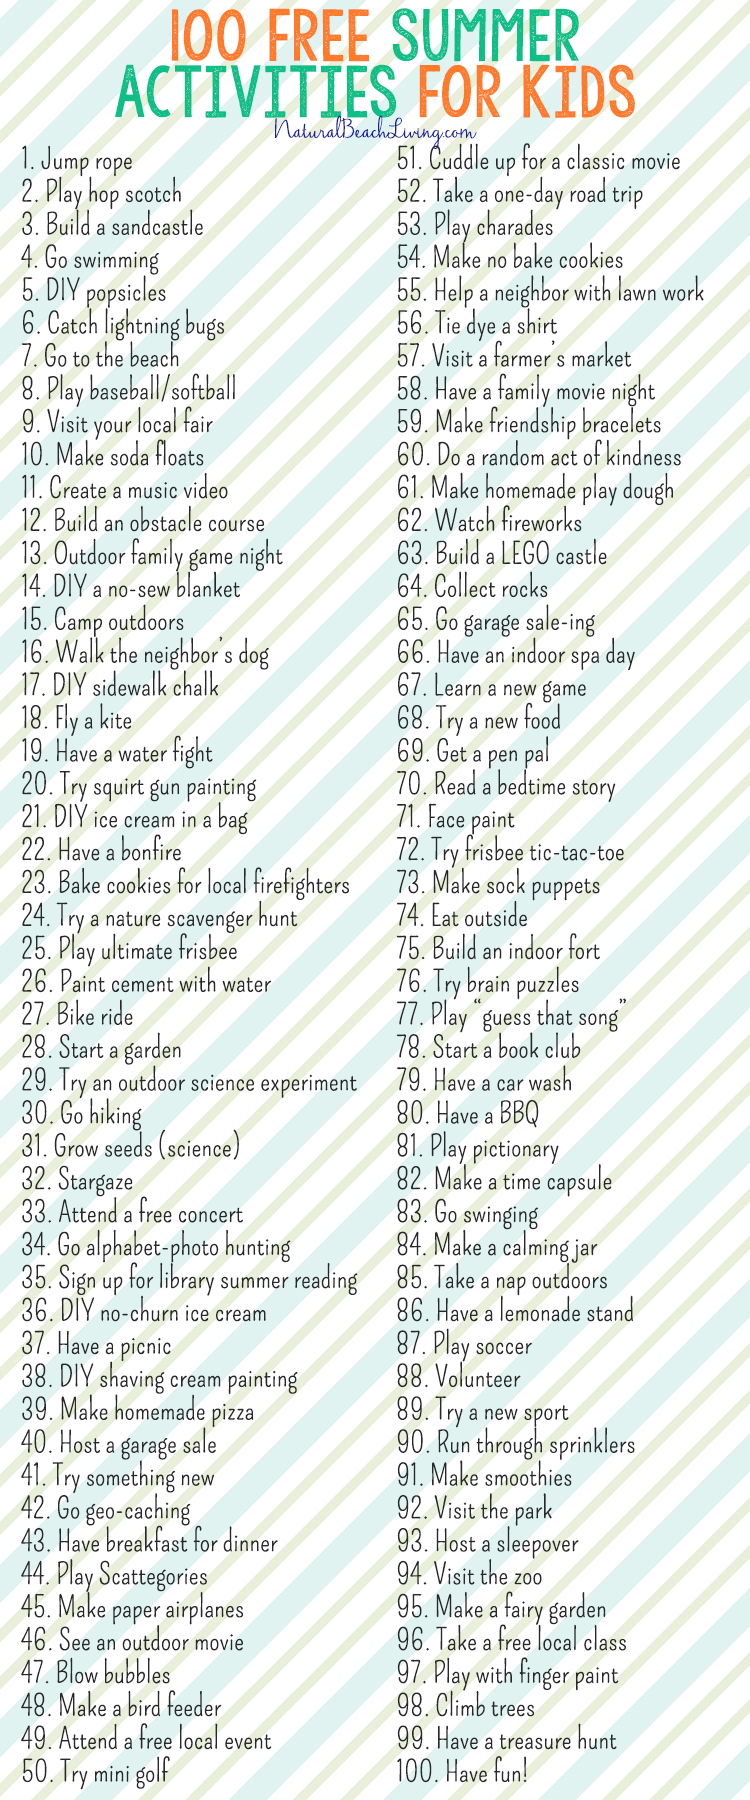 100 Free Summer Activities for Kids, Awesome List of things to do this summer! Great Ideas for Family Fun, Free Printable Summer Chart keep the family happy